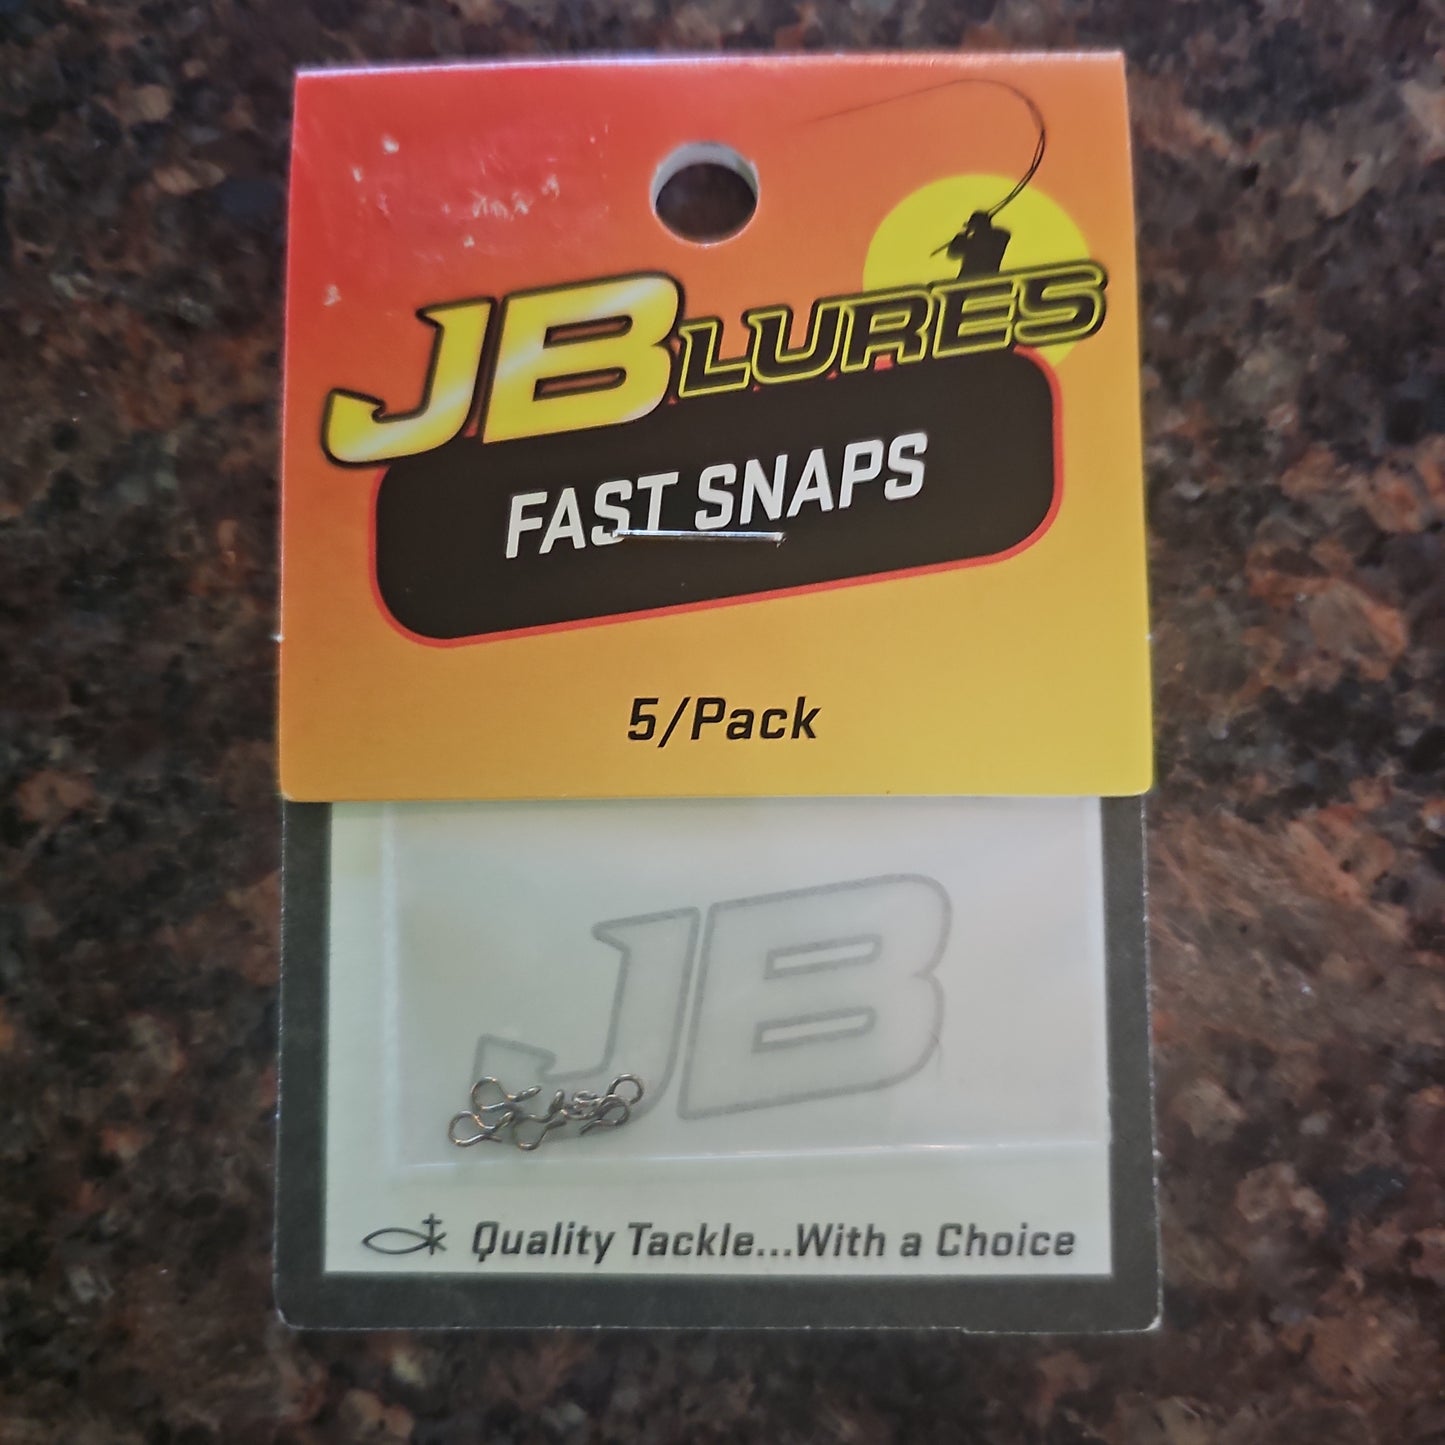 JB Lures Fast Snaps